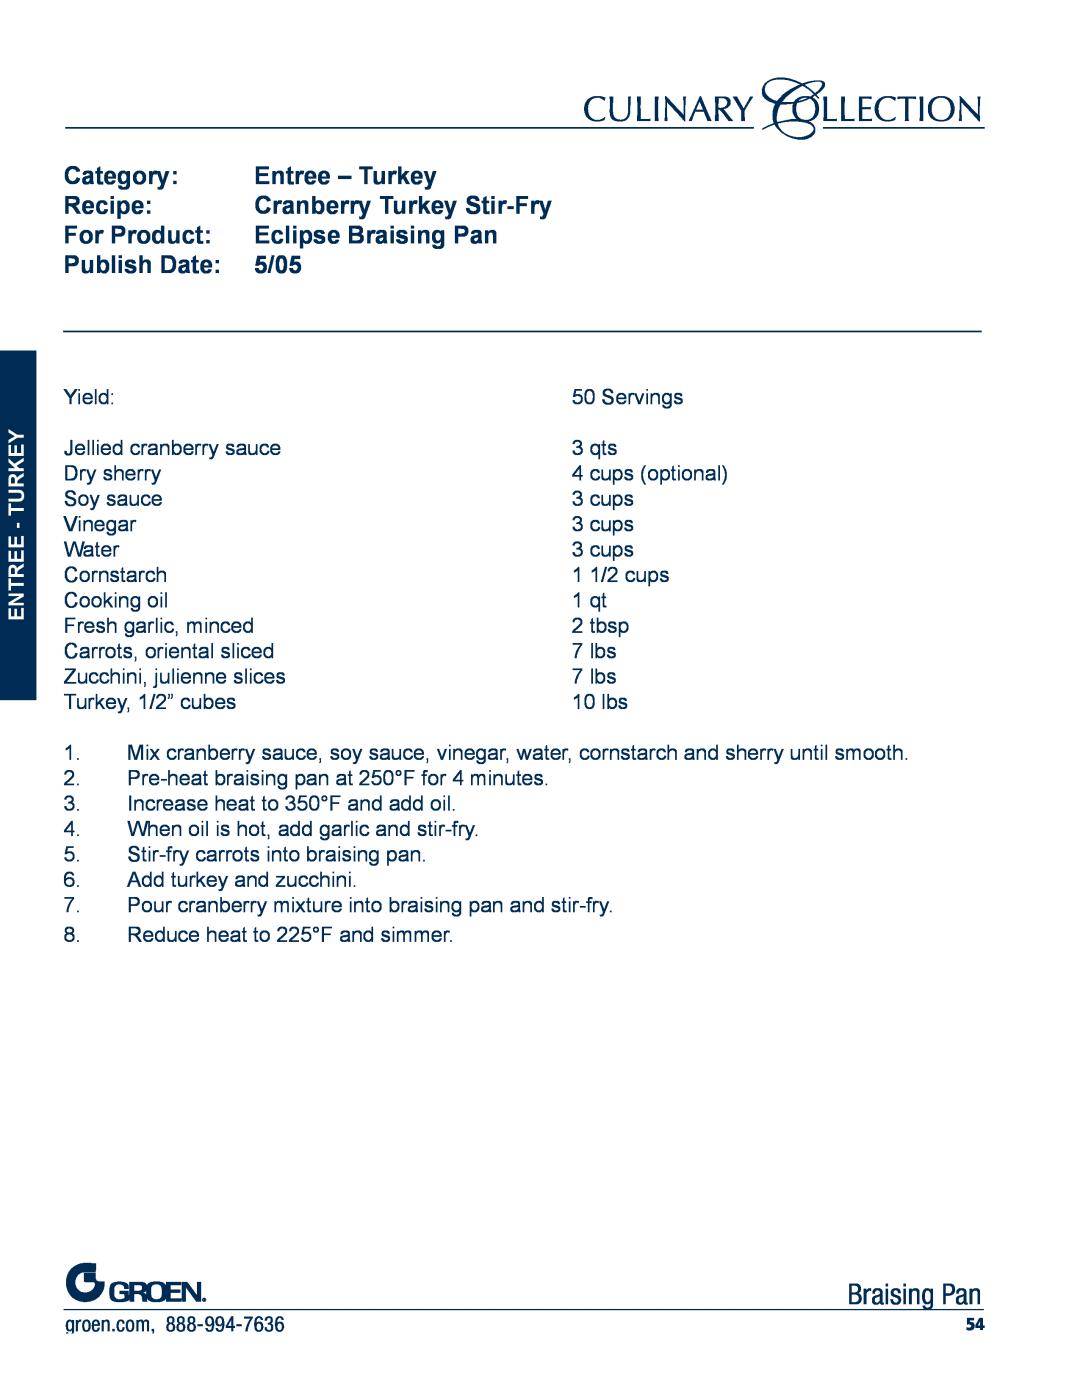 Unified Brands Braising Pan Entree - Turkey, Cranberry Turkey Stir-Fry, Category, Recipe, For Product, Publish Date, 5/05 